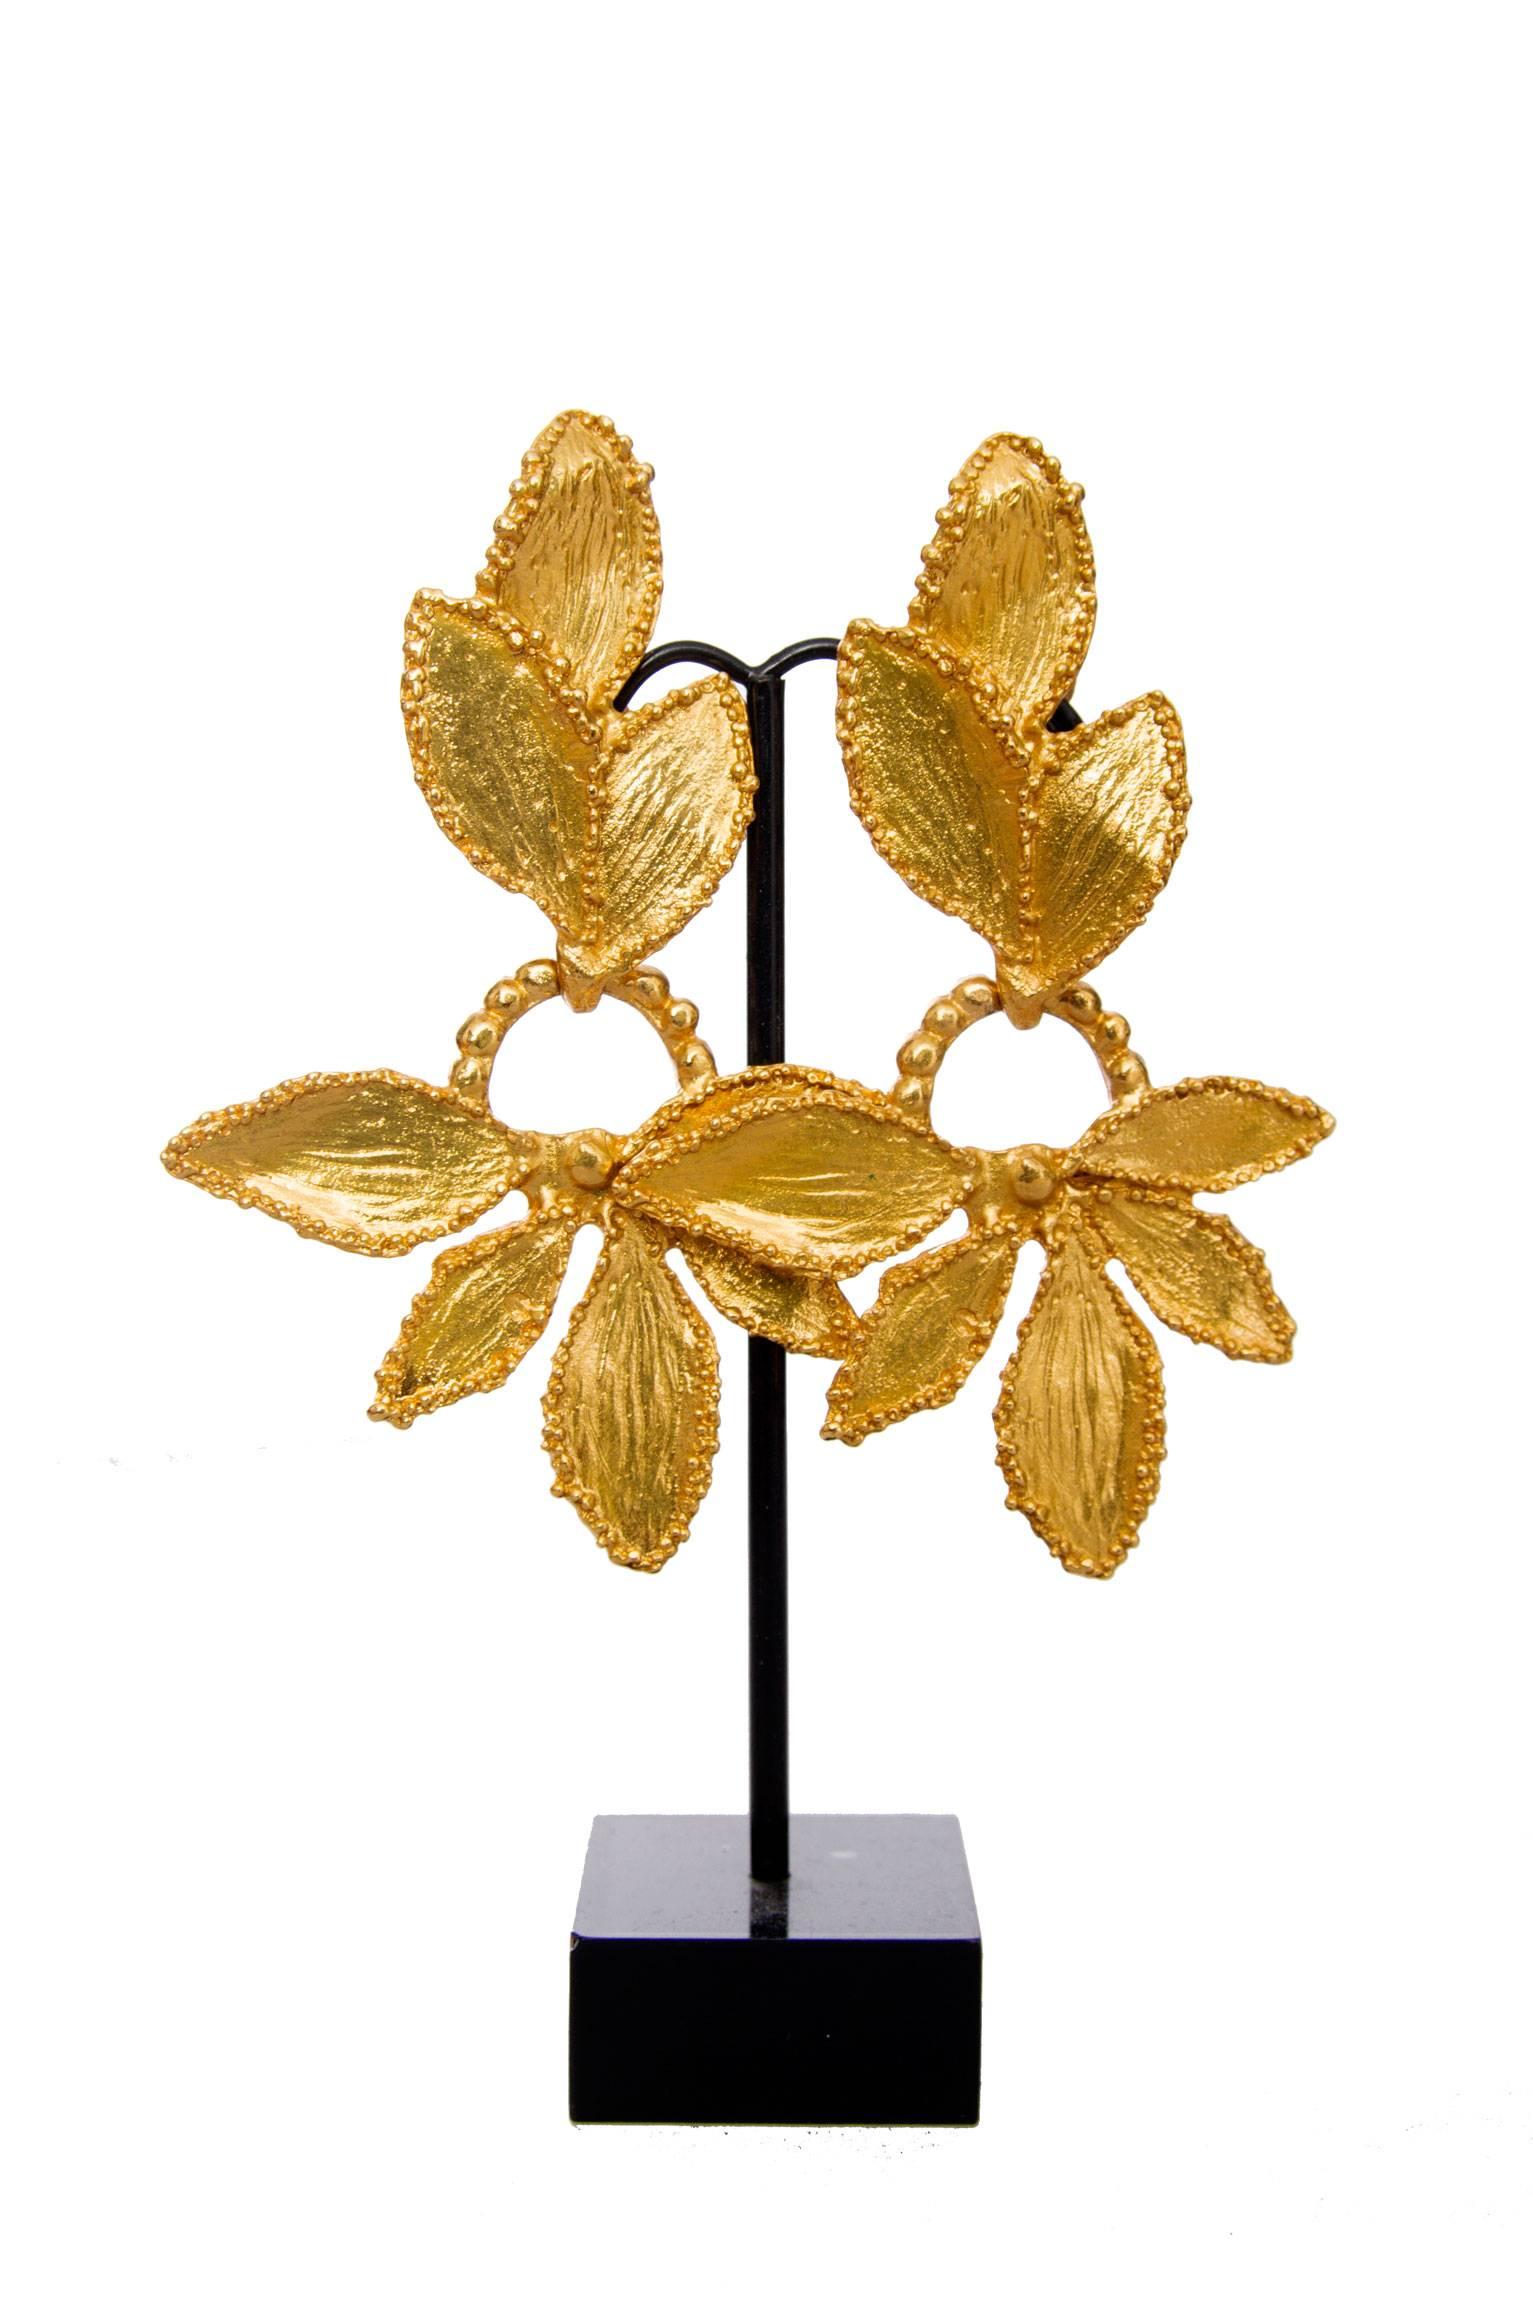 A lovely pair of 1980s Yves Saint Laurent gold plated leaf shaped clip on earrings with a dangling leaf setting hanging from a delicate strand of gold plated beads.

On the back the earrings are stamped: YSL Made in France